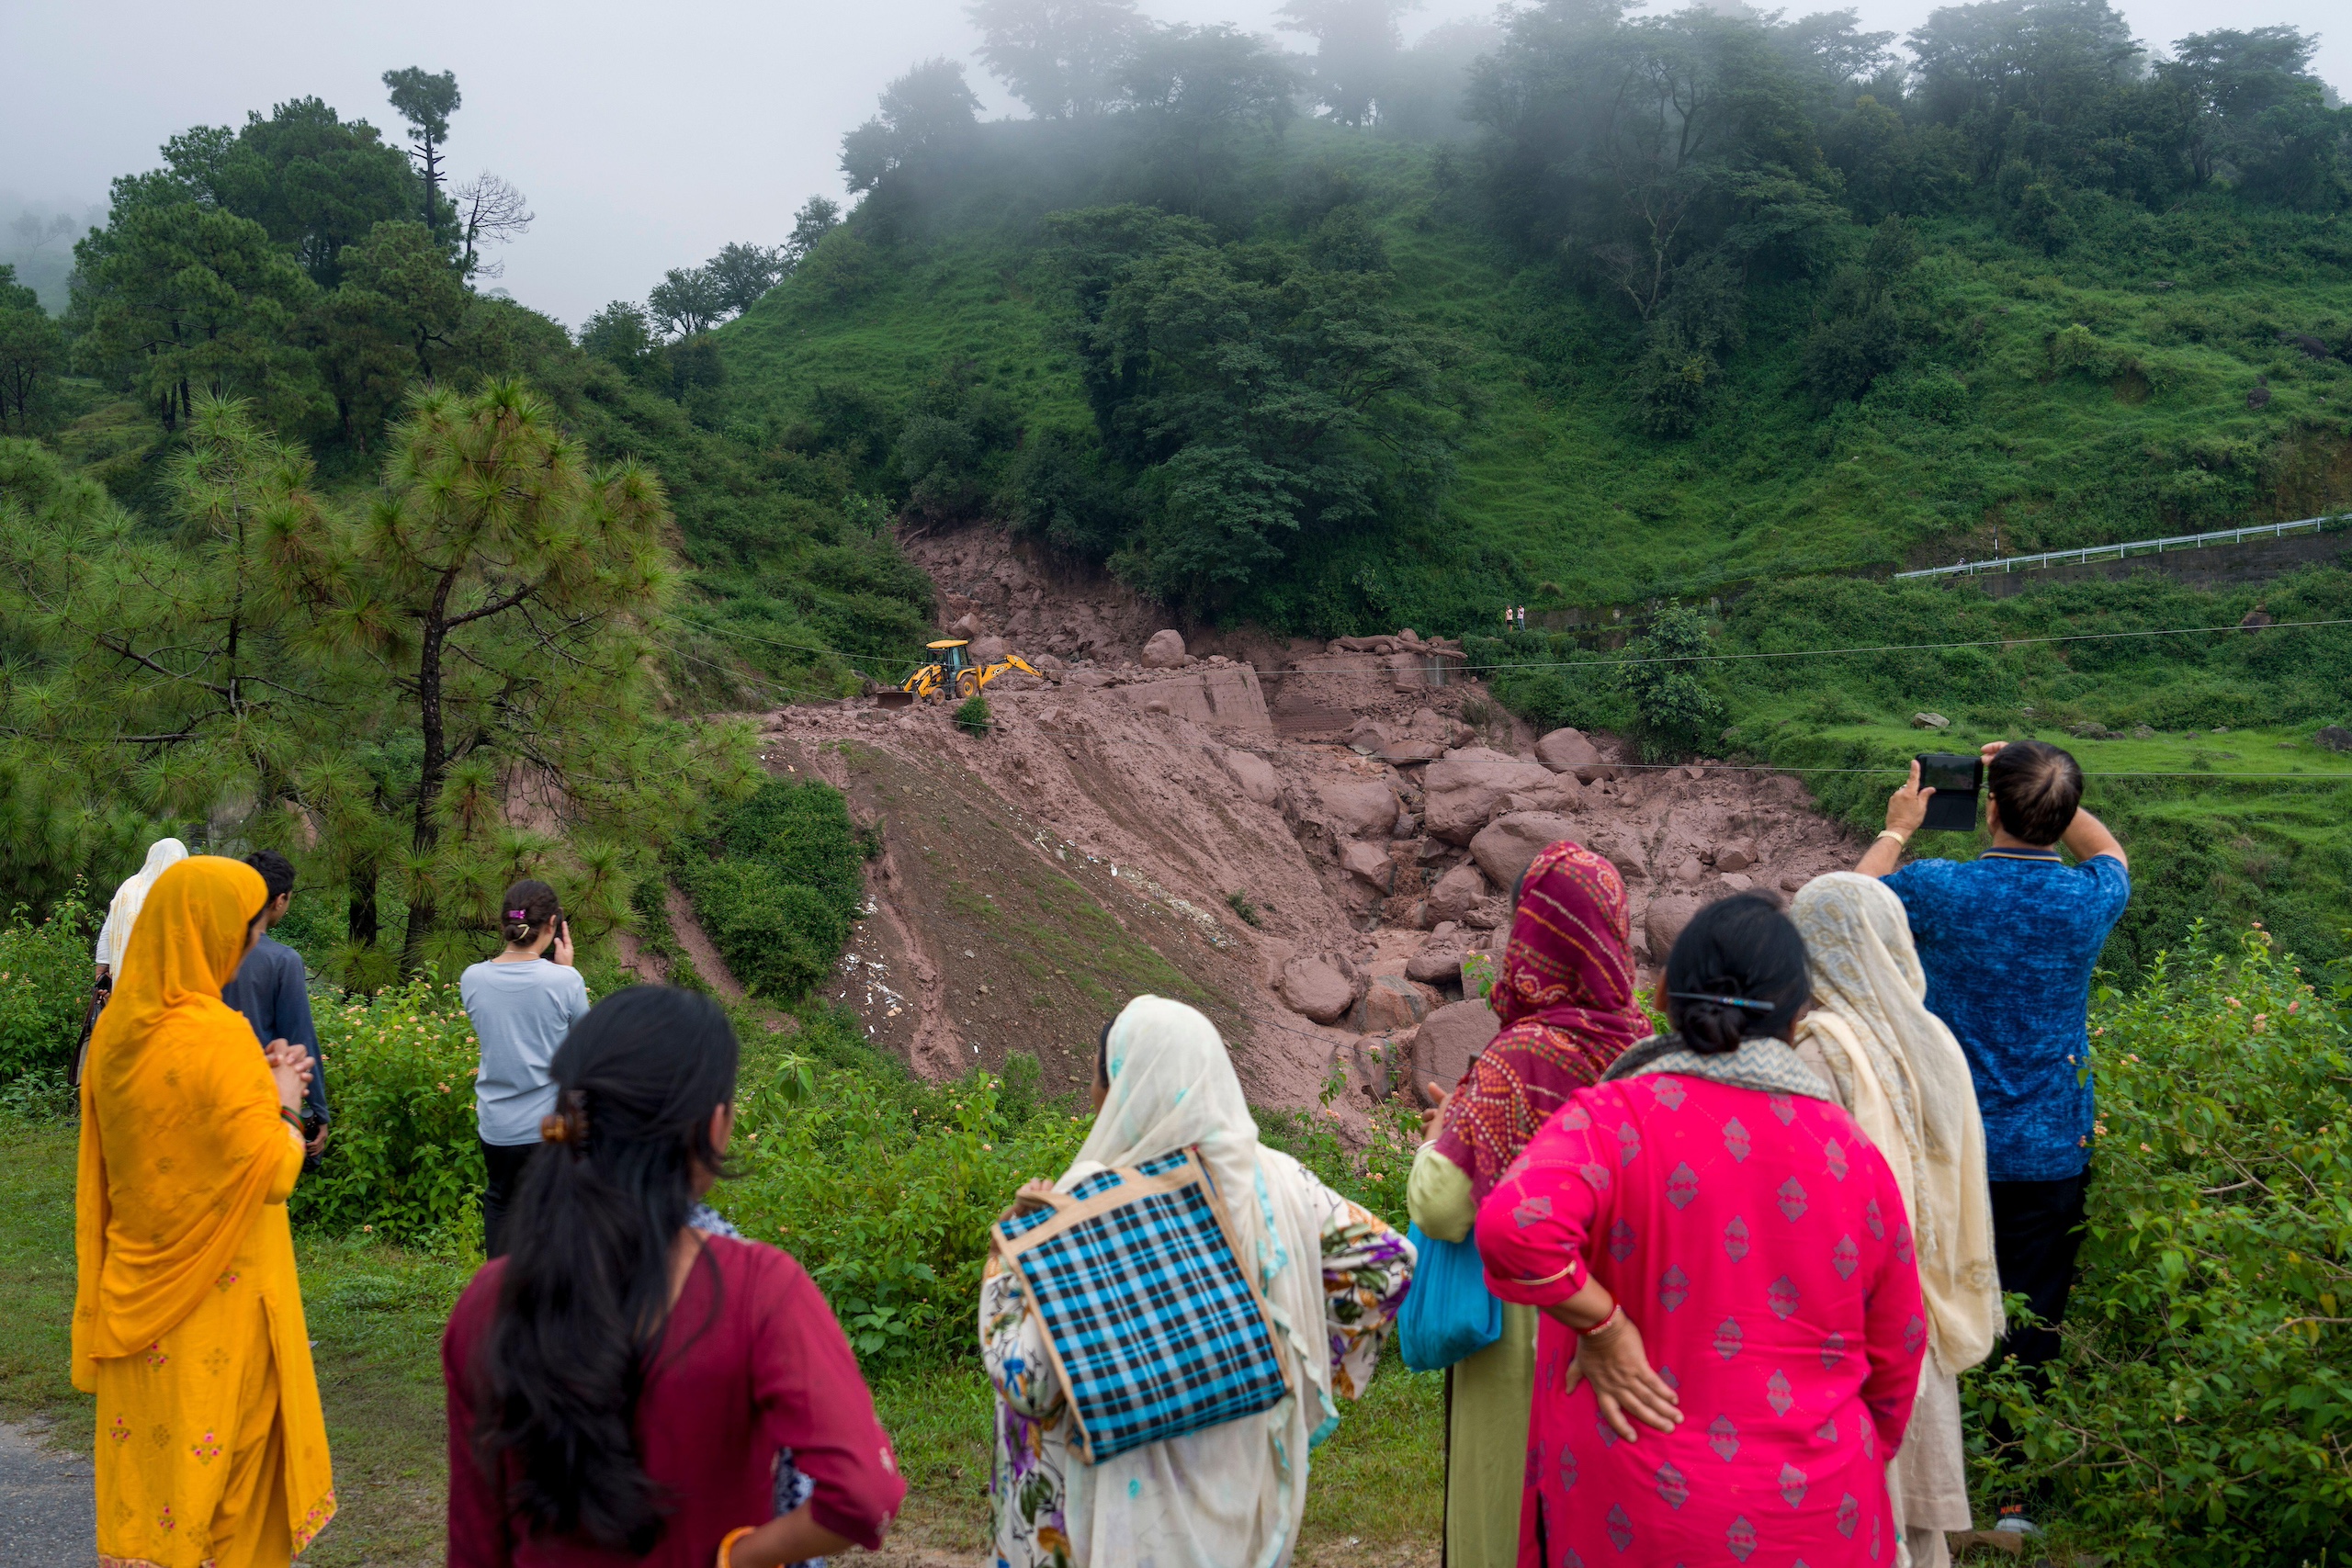 <p>People watch a digger moving debris after a landslide damaged a road near Dharamshala, August 14 2023. Heavy monsoon rains triggered floods and landslides in India&#8217;s Himalayan region, leaving several people dead and many others trapped. (Image: Ashwini Bhatia / AP via Alamy)</p>